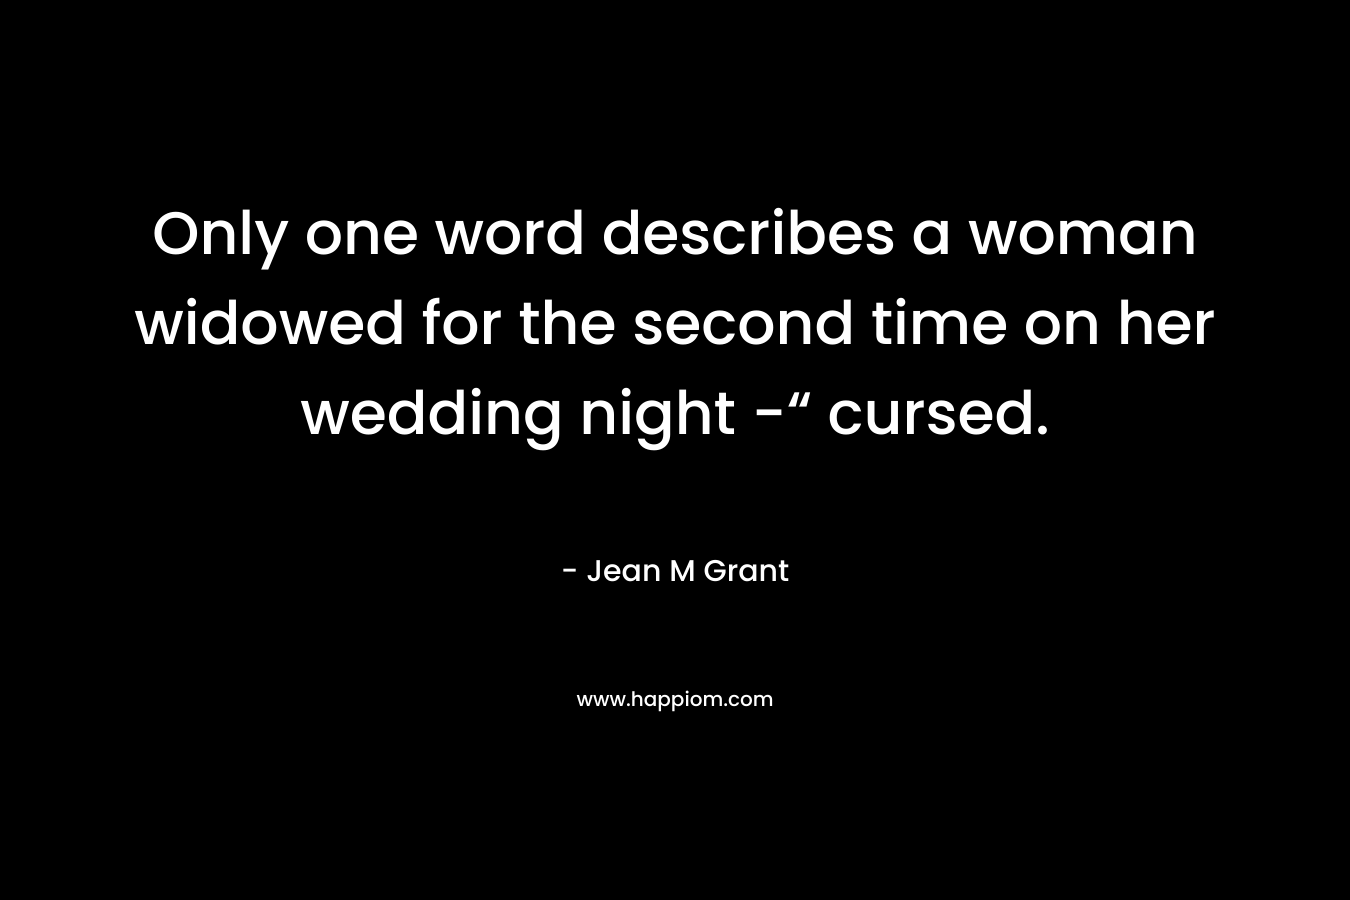 Only one word describes a woman widowed for the second time on her wedding night -“ cursed.